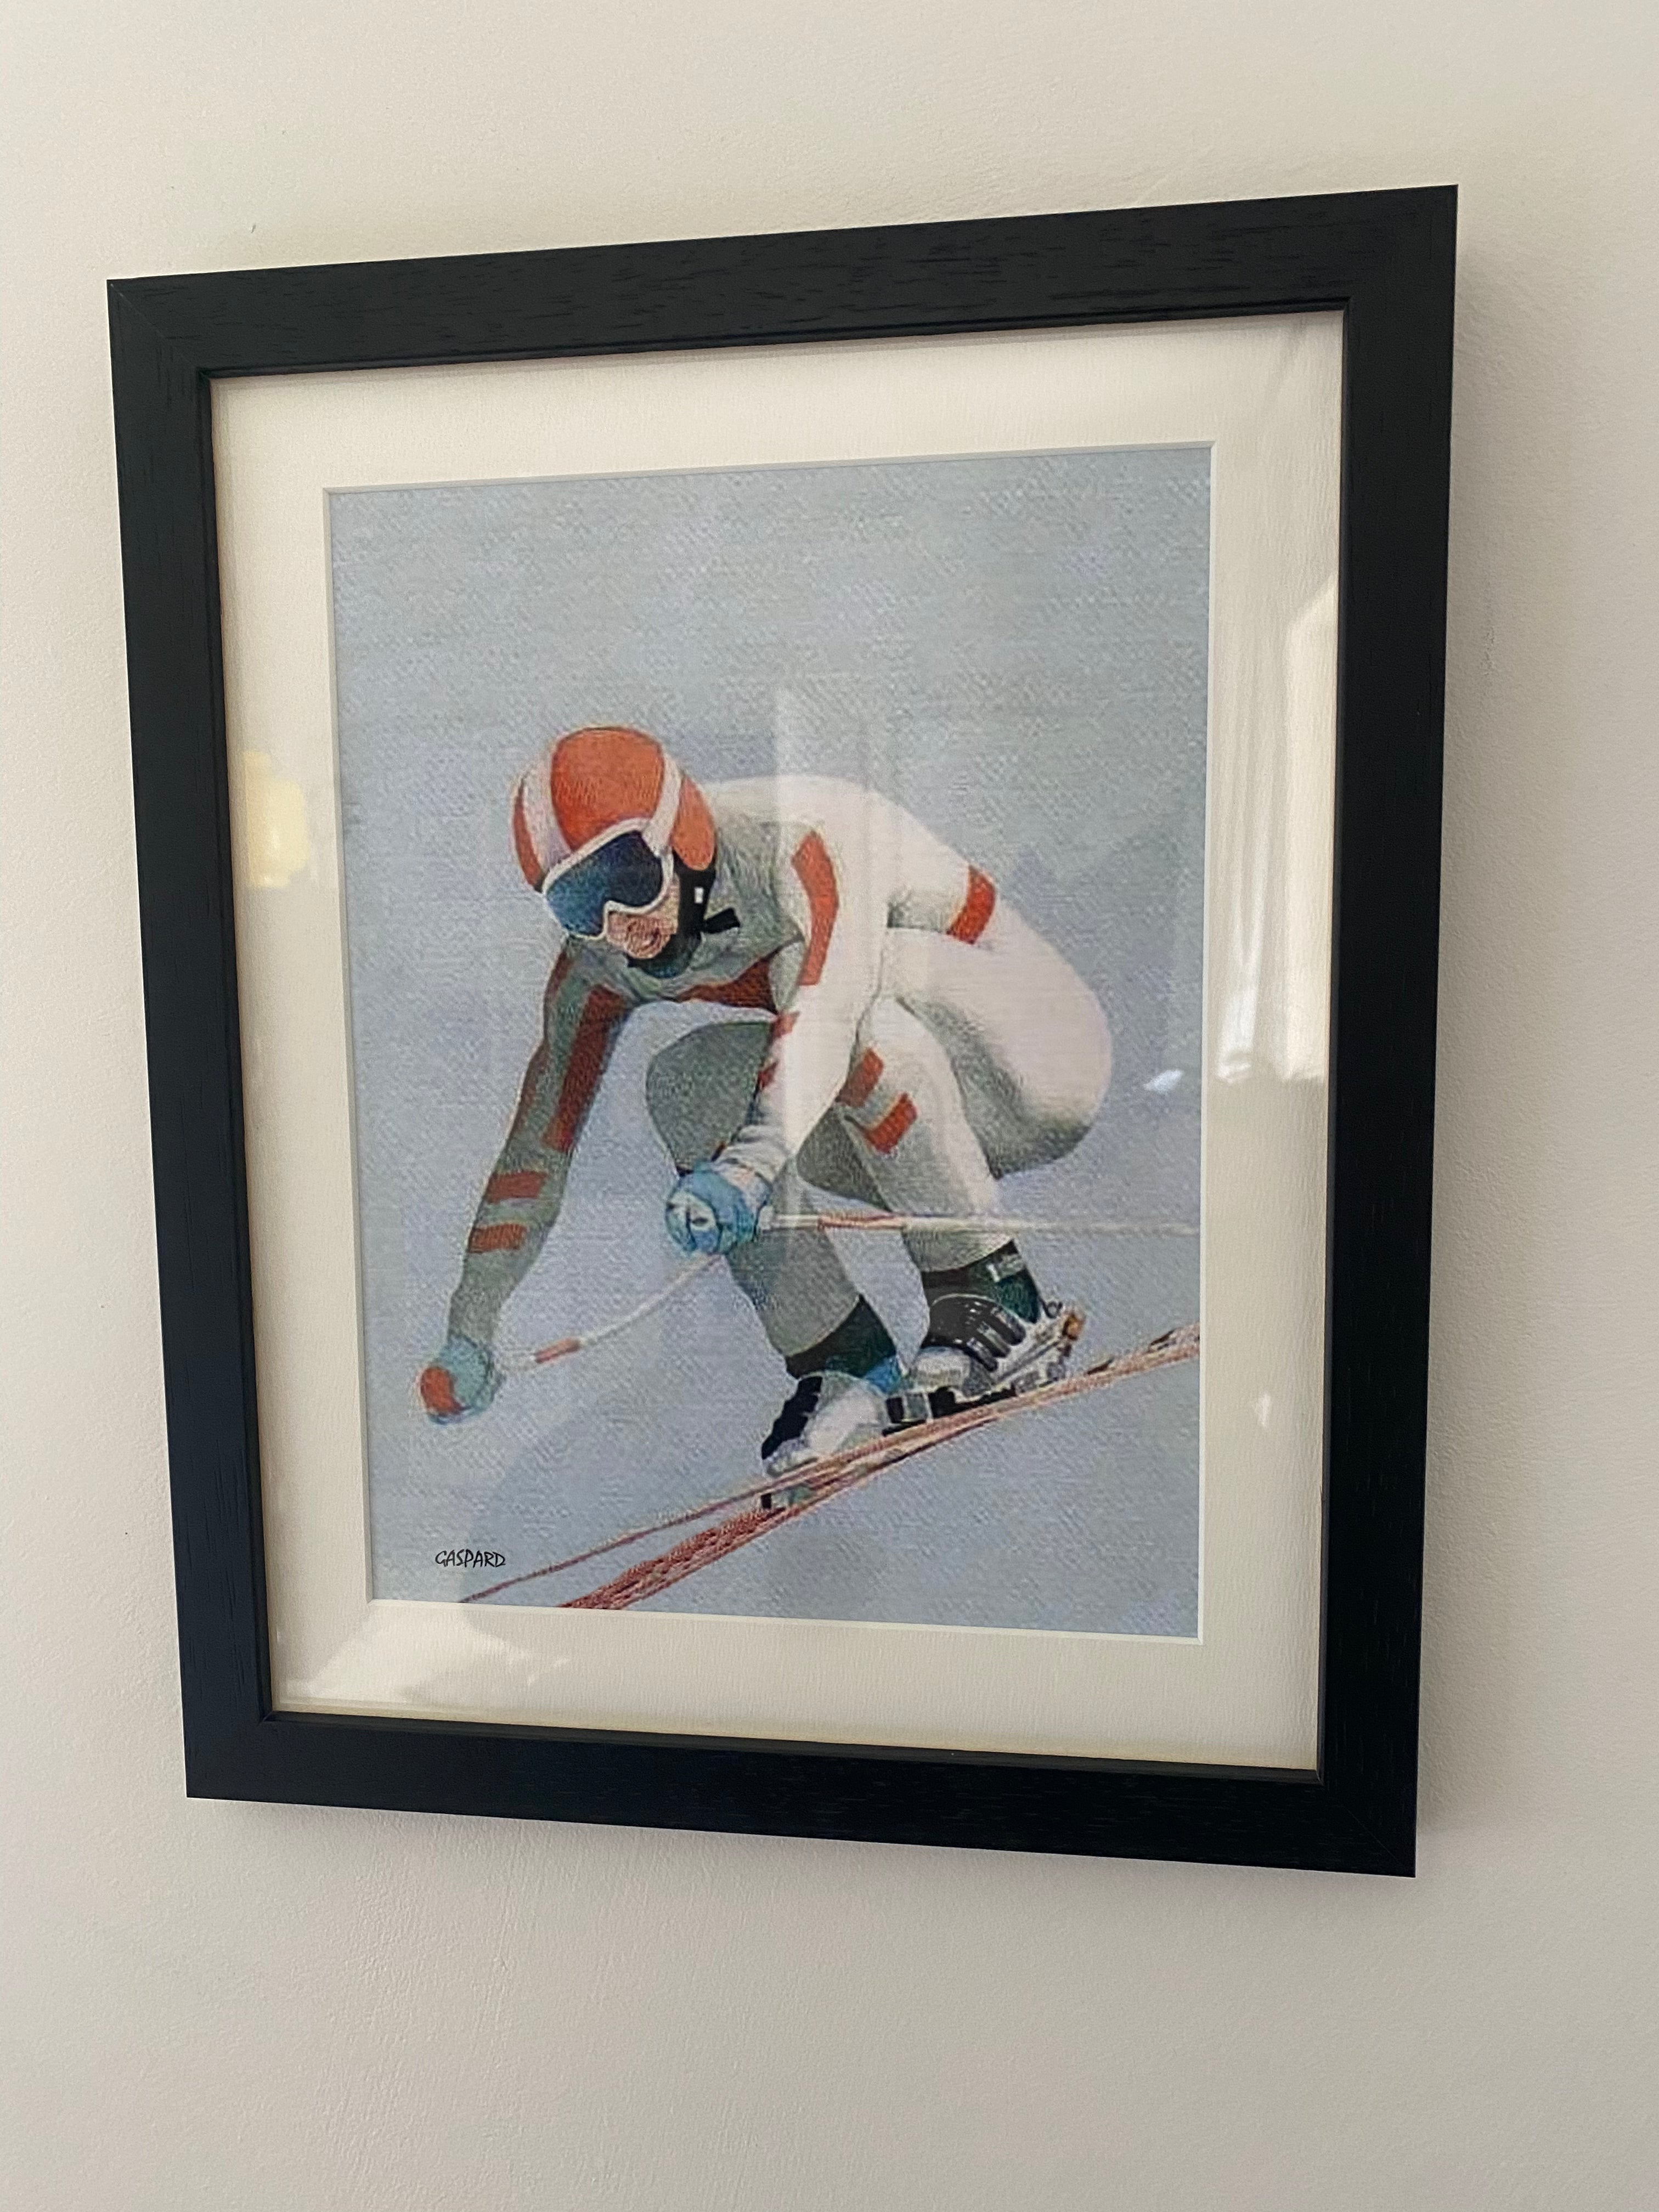 Black framed print of a person in a white fitted racing suit with red stripes, a red helmet with a central white stripe, with skis, boots and poles in a crouched position airborne and skiing downhill, with a light blue sky in the background, hanging on a white wall.